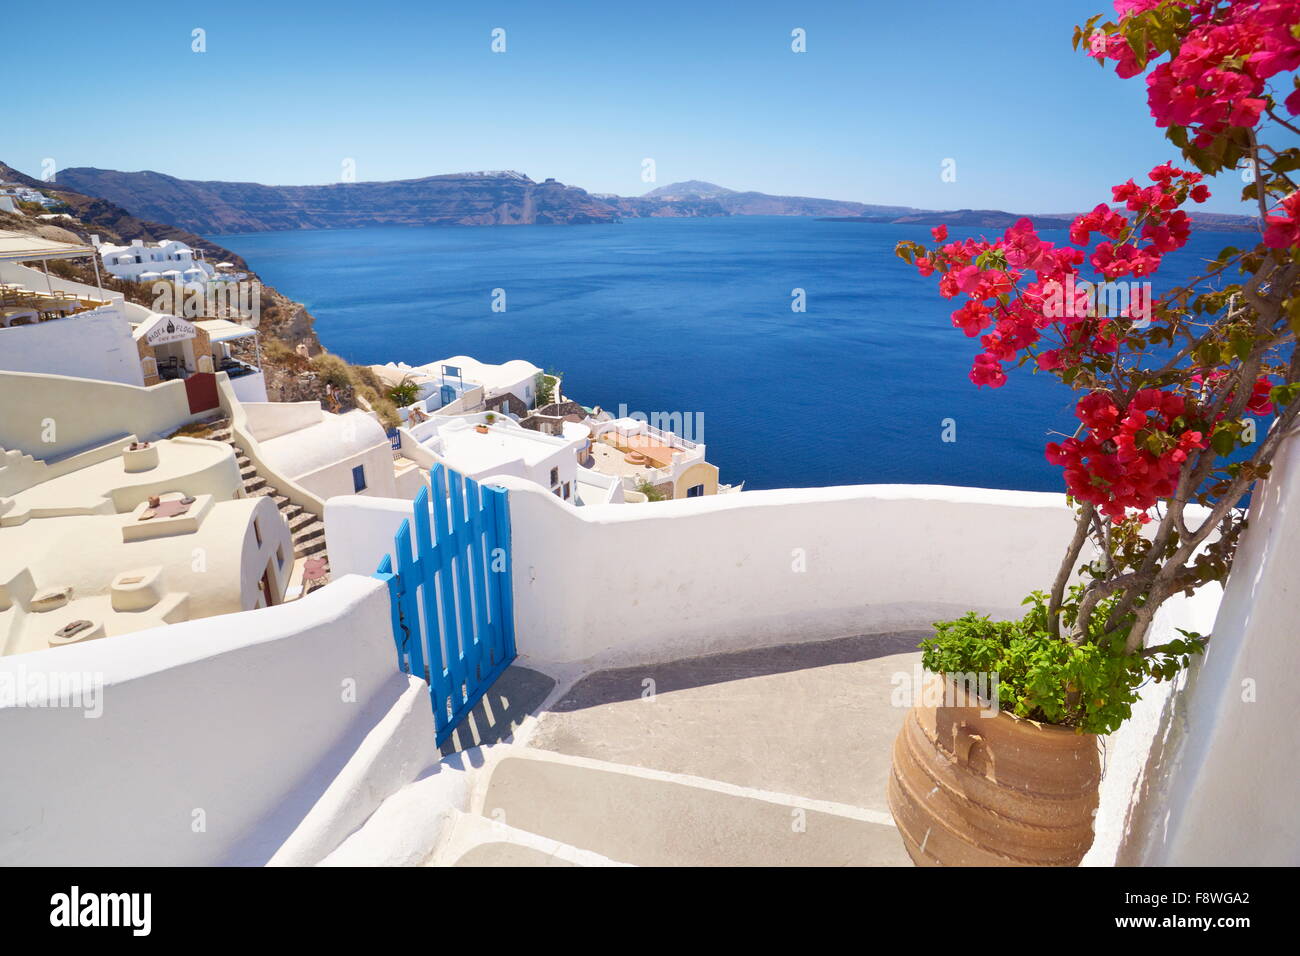 Santorini landscape with blooming flowers in Oia Town, Santorini Island, Cyclades, Greece Stock Photo